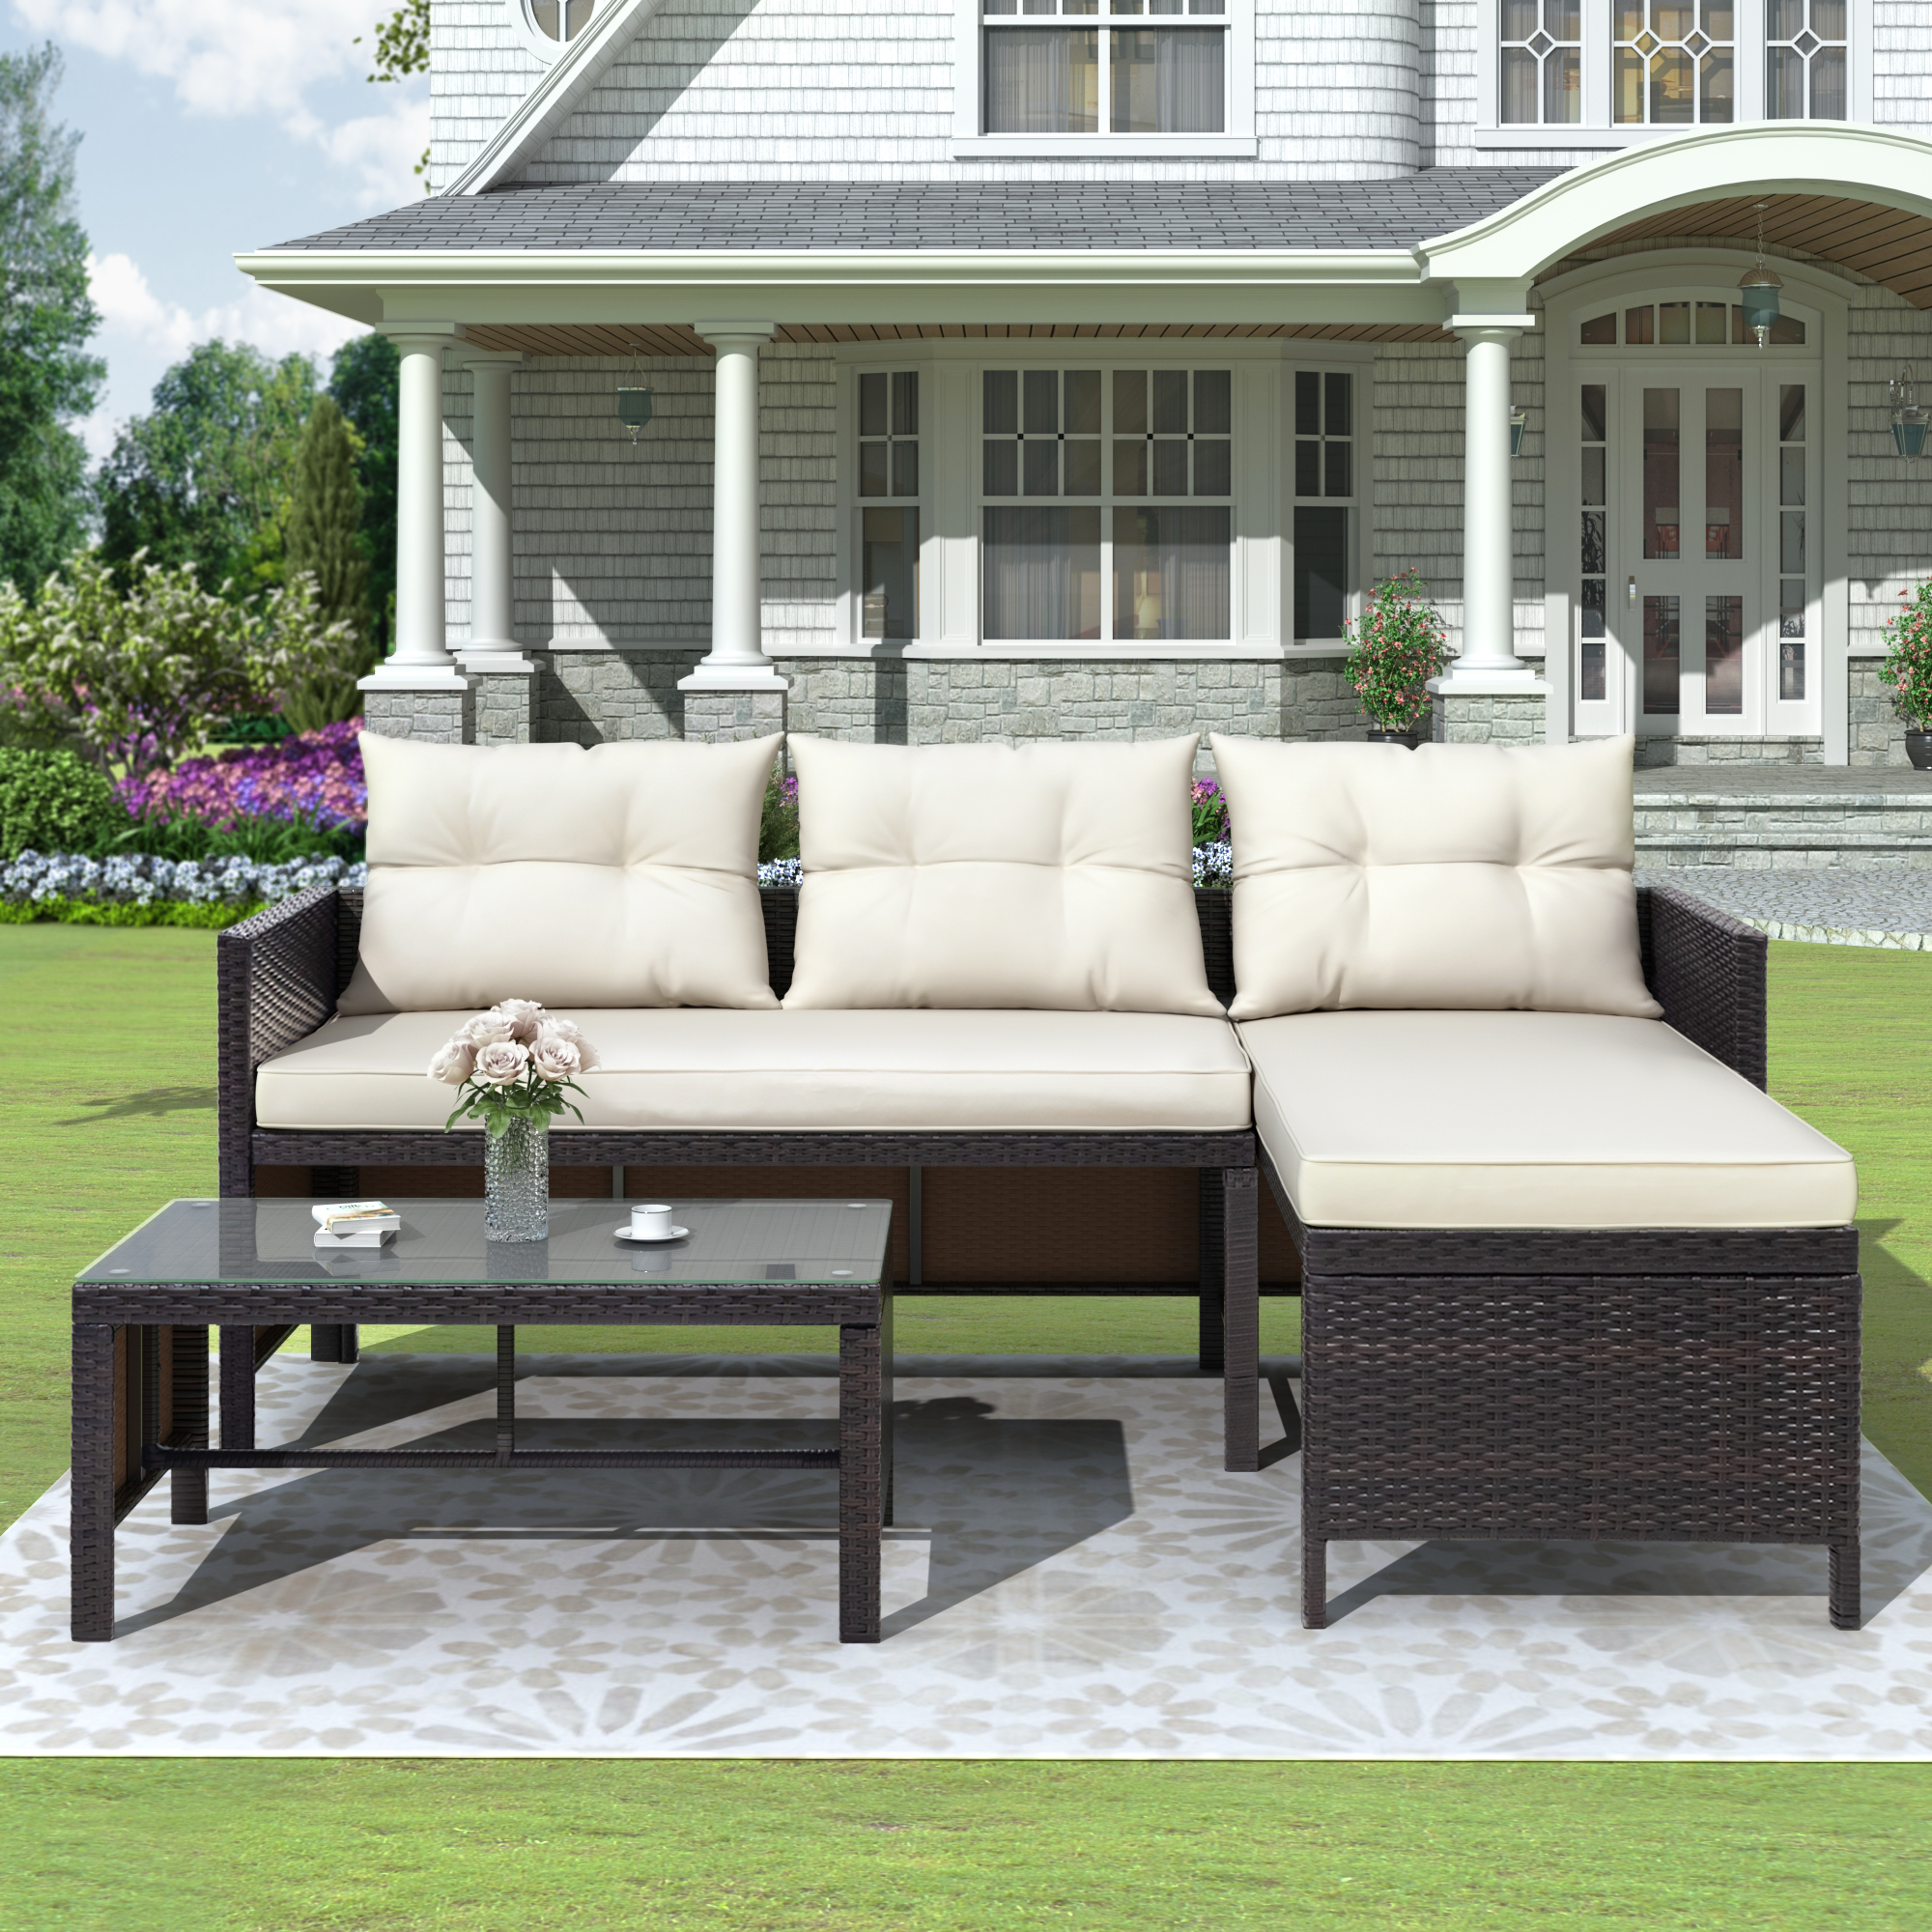 Patio Furniture Sectional Set, 3 Pieces PE Wicker Cushioned Sofa Set, Outdoor Conversation Chair Set with Two-Seater Sofa, Lounge Sofa and Coffee Table, for Backyard, Poolside, Garden, Deck, D6029 - image 2 of 10